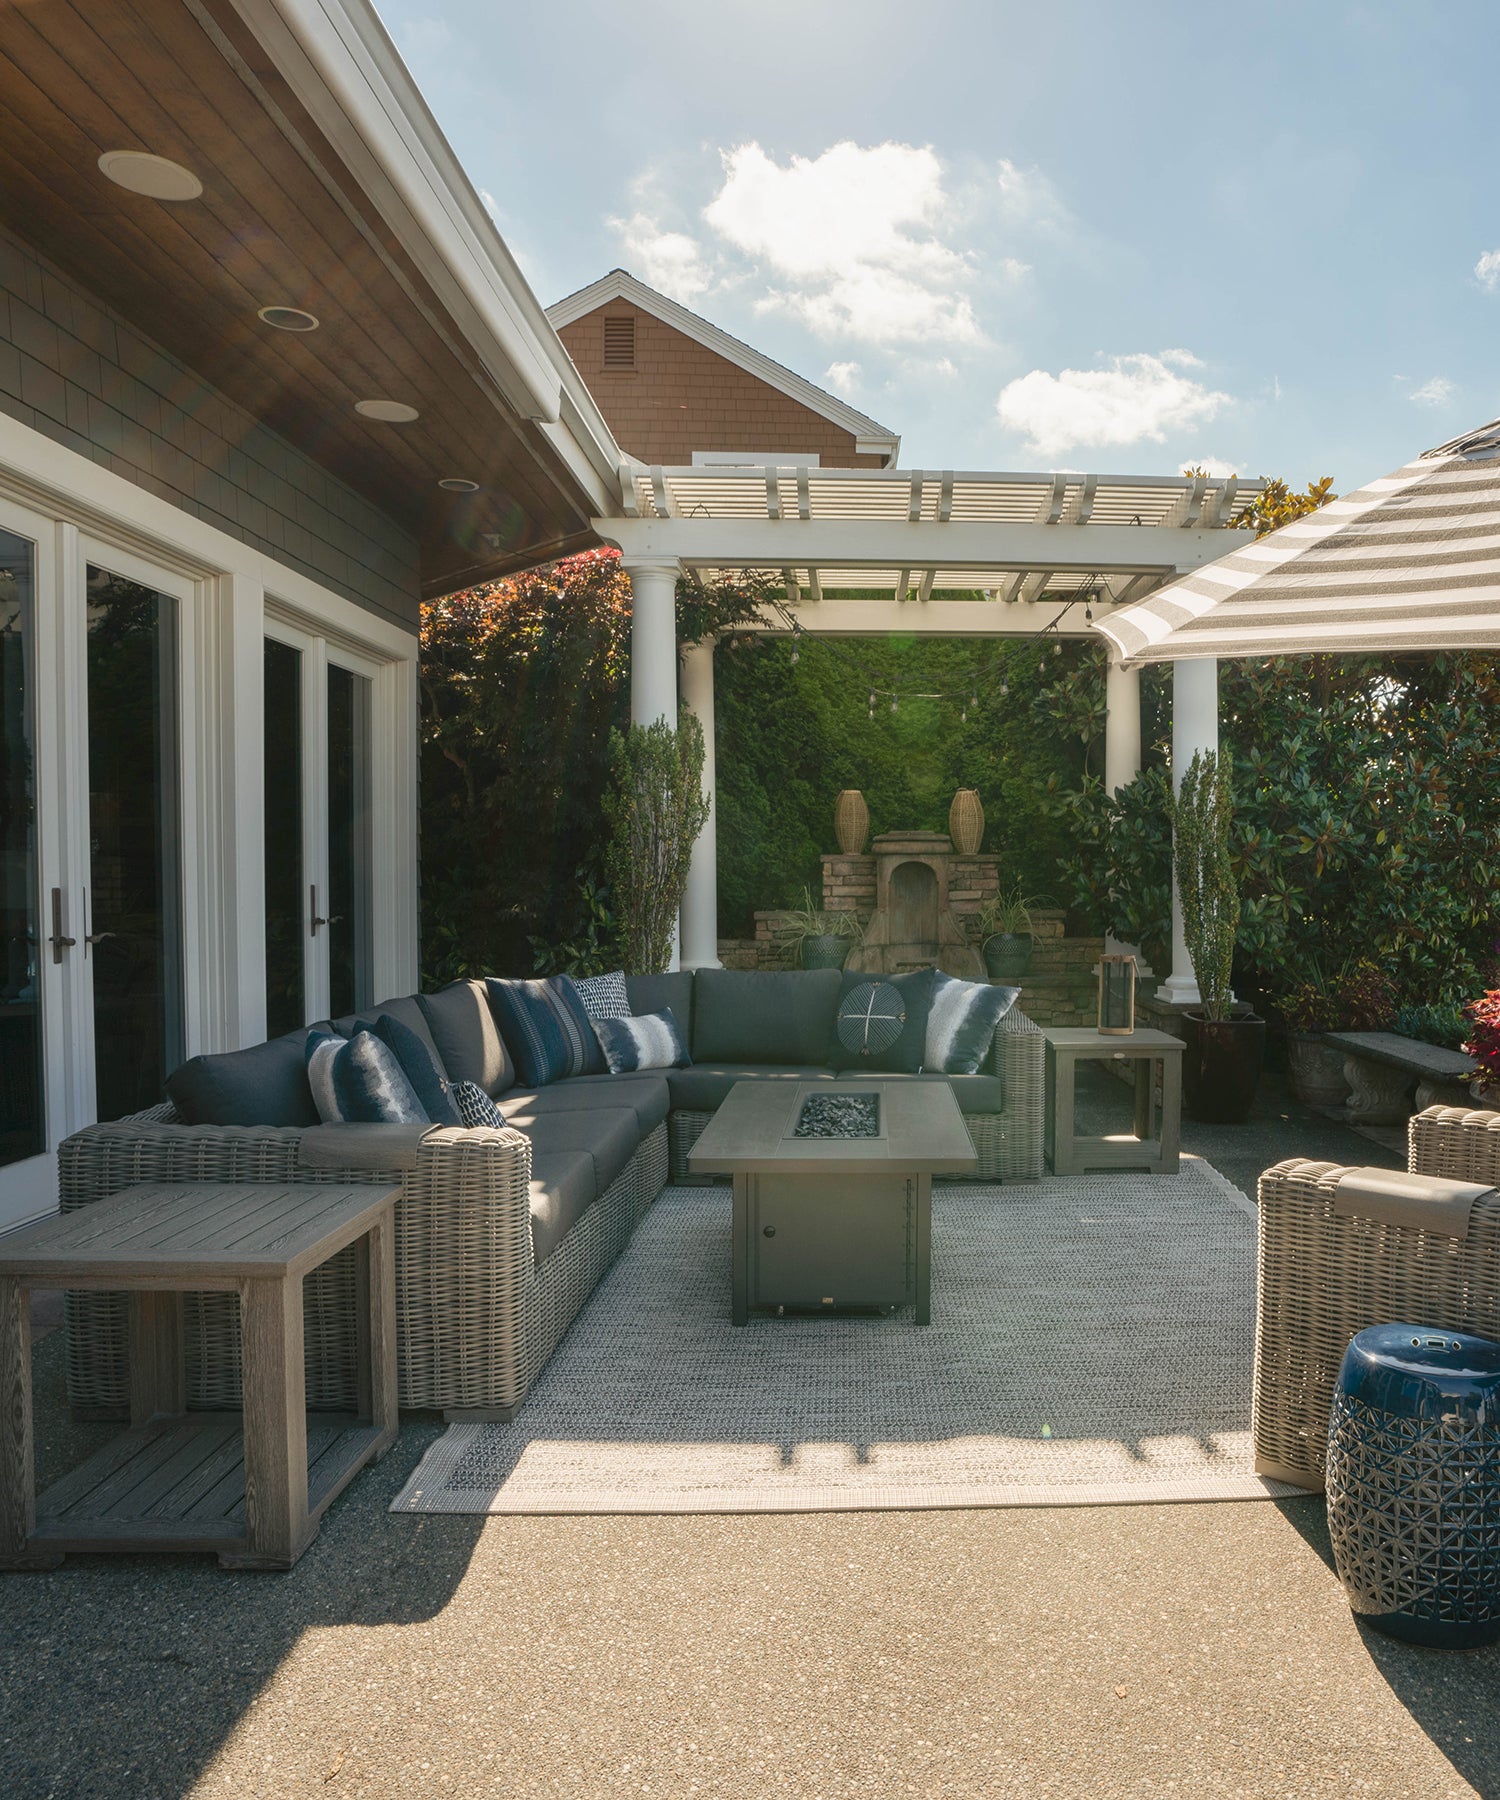 A large woven outdoor sectional with dark grey cushions flanked by two aluminum side tables and a fire pit table in the center